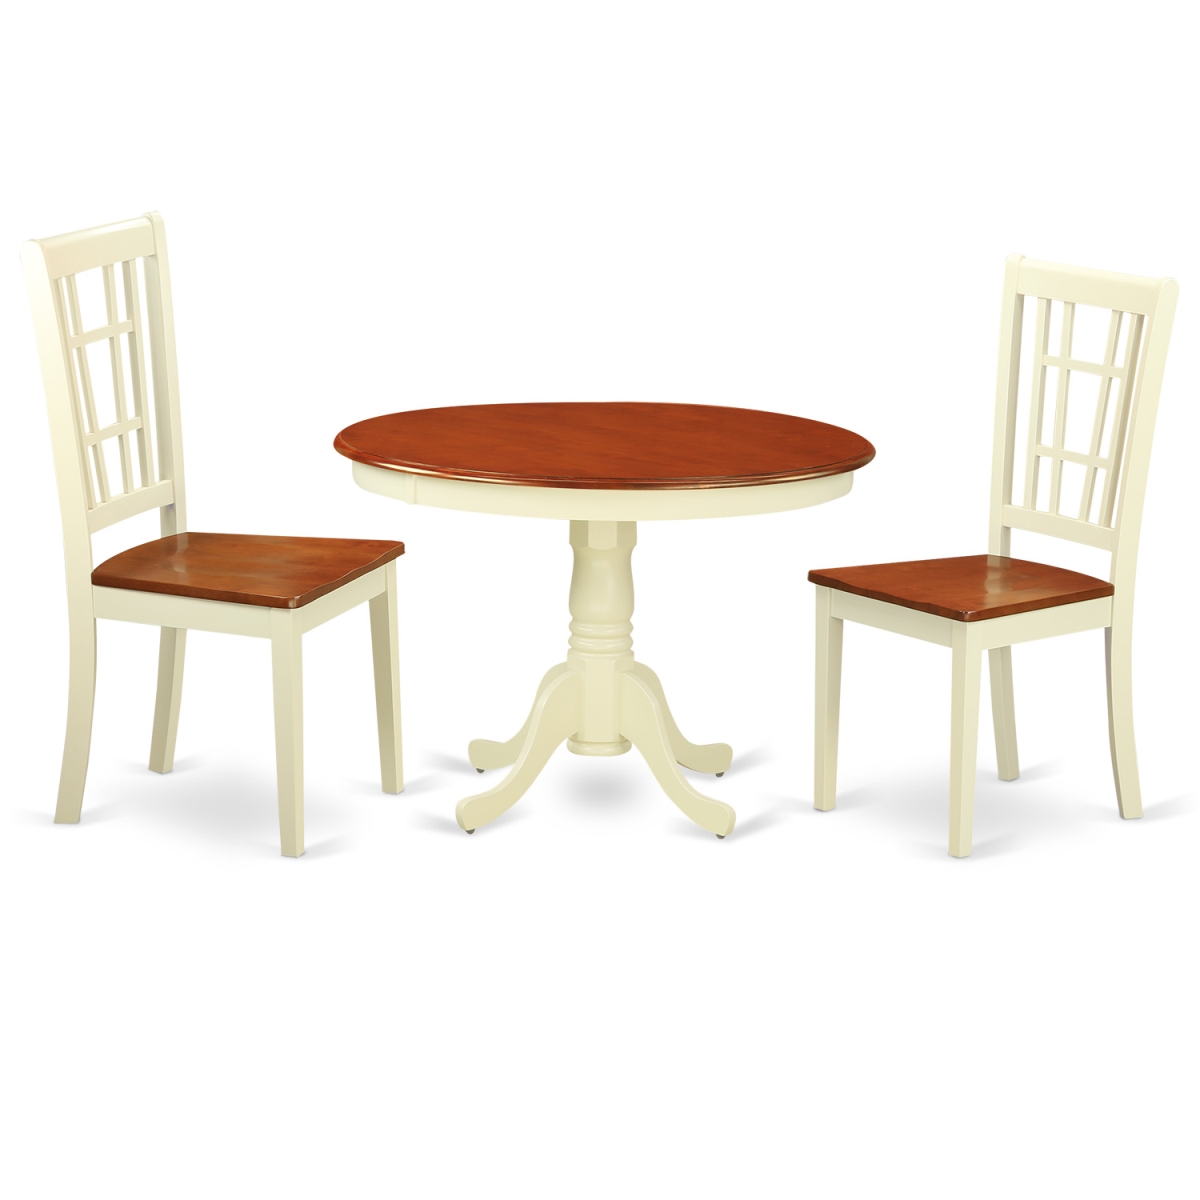 Picture of East West Furniture HLNI3-BMK-W Wood Seat Dining Set - 1 Round Small Table & 2 Chairs with Buttermilk & Cherry - 42 in. - 3 Piece